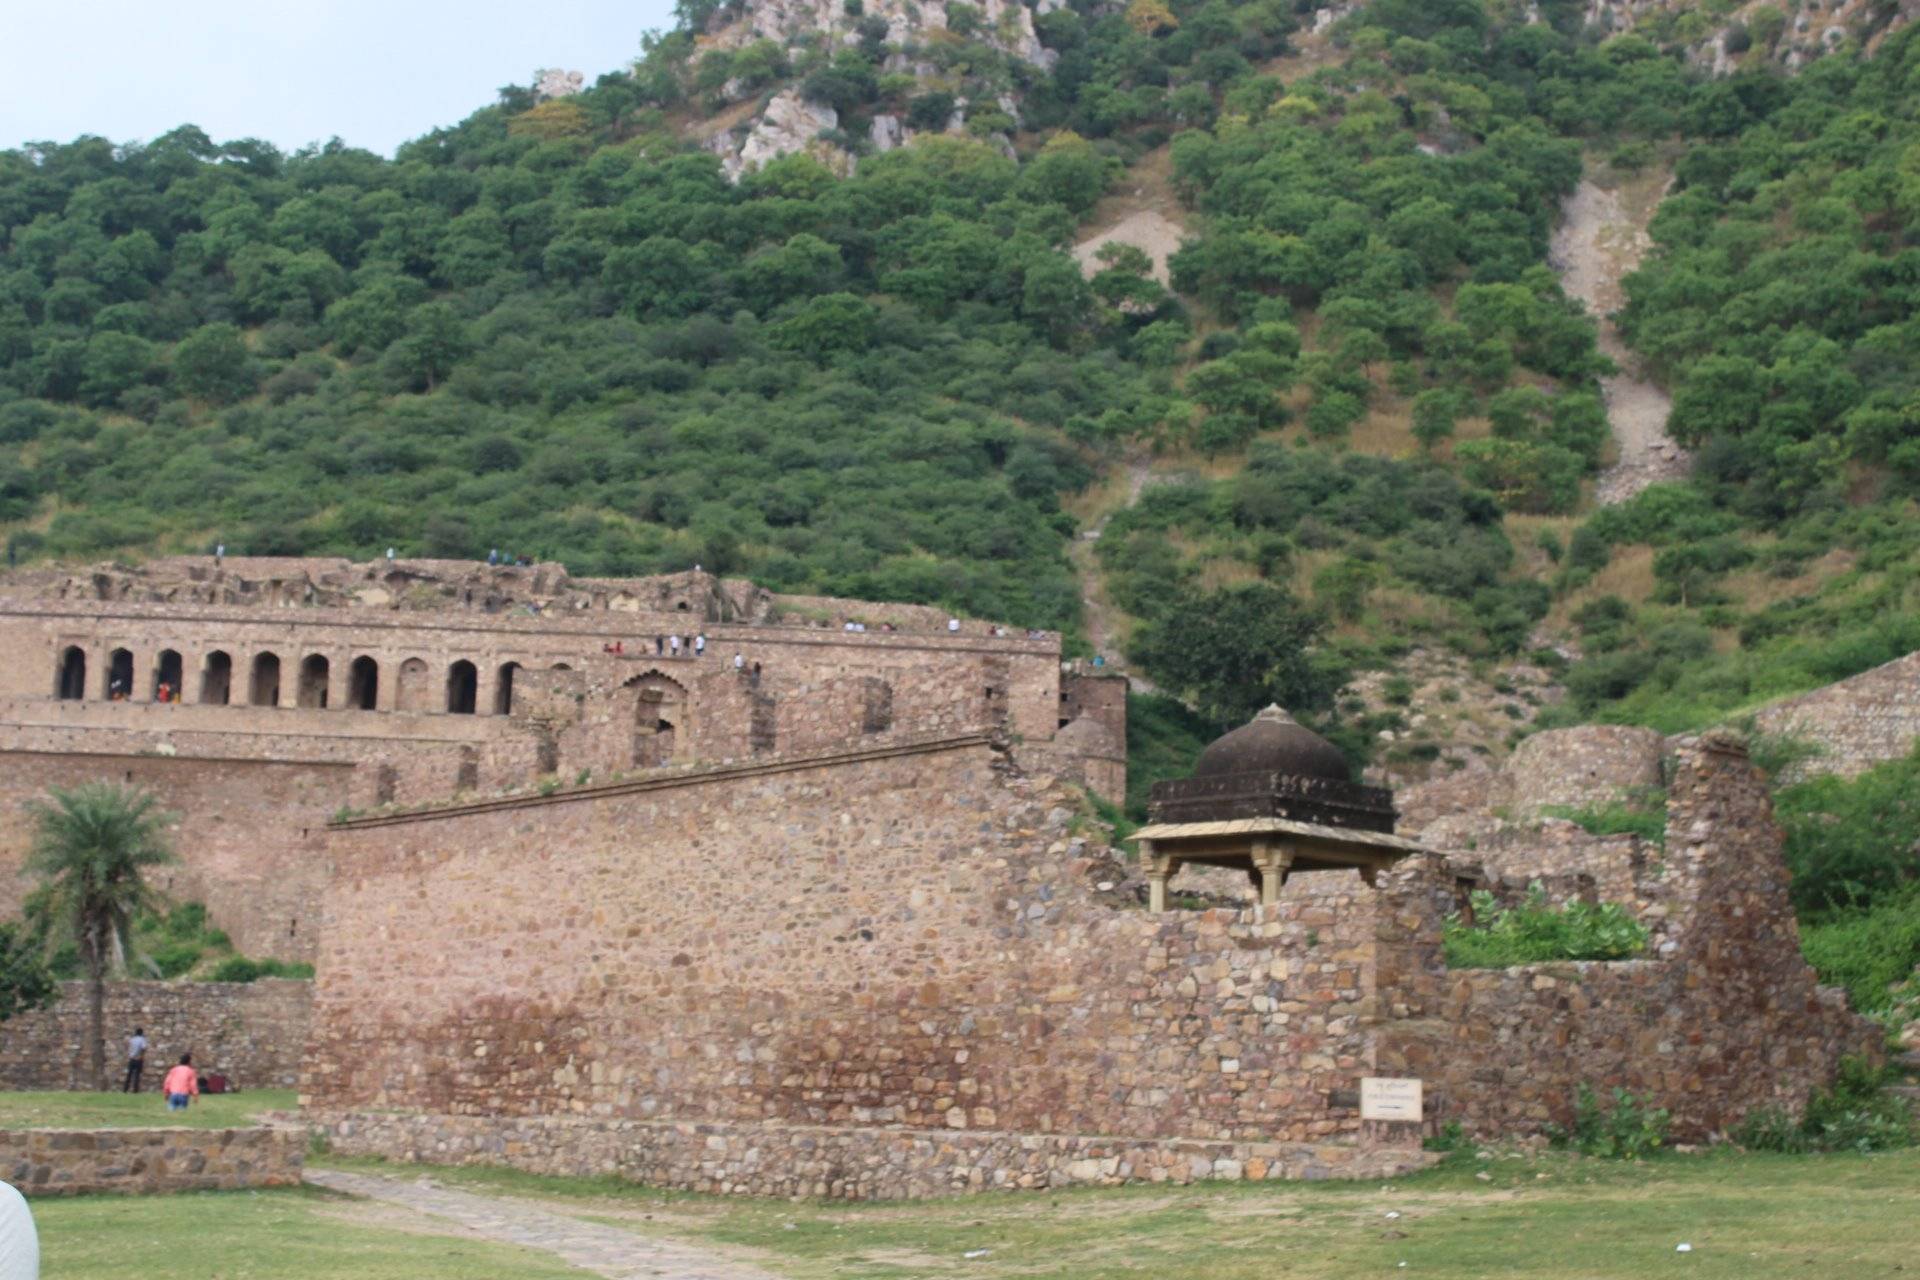 The ruins of fort.